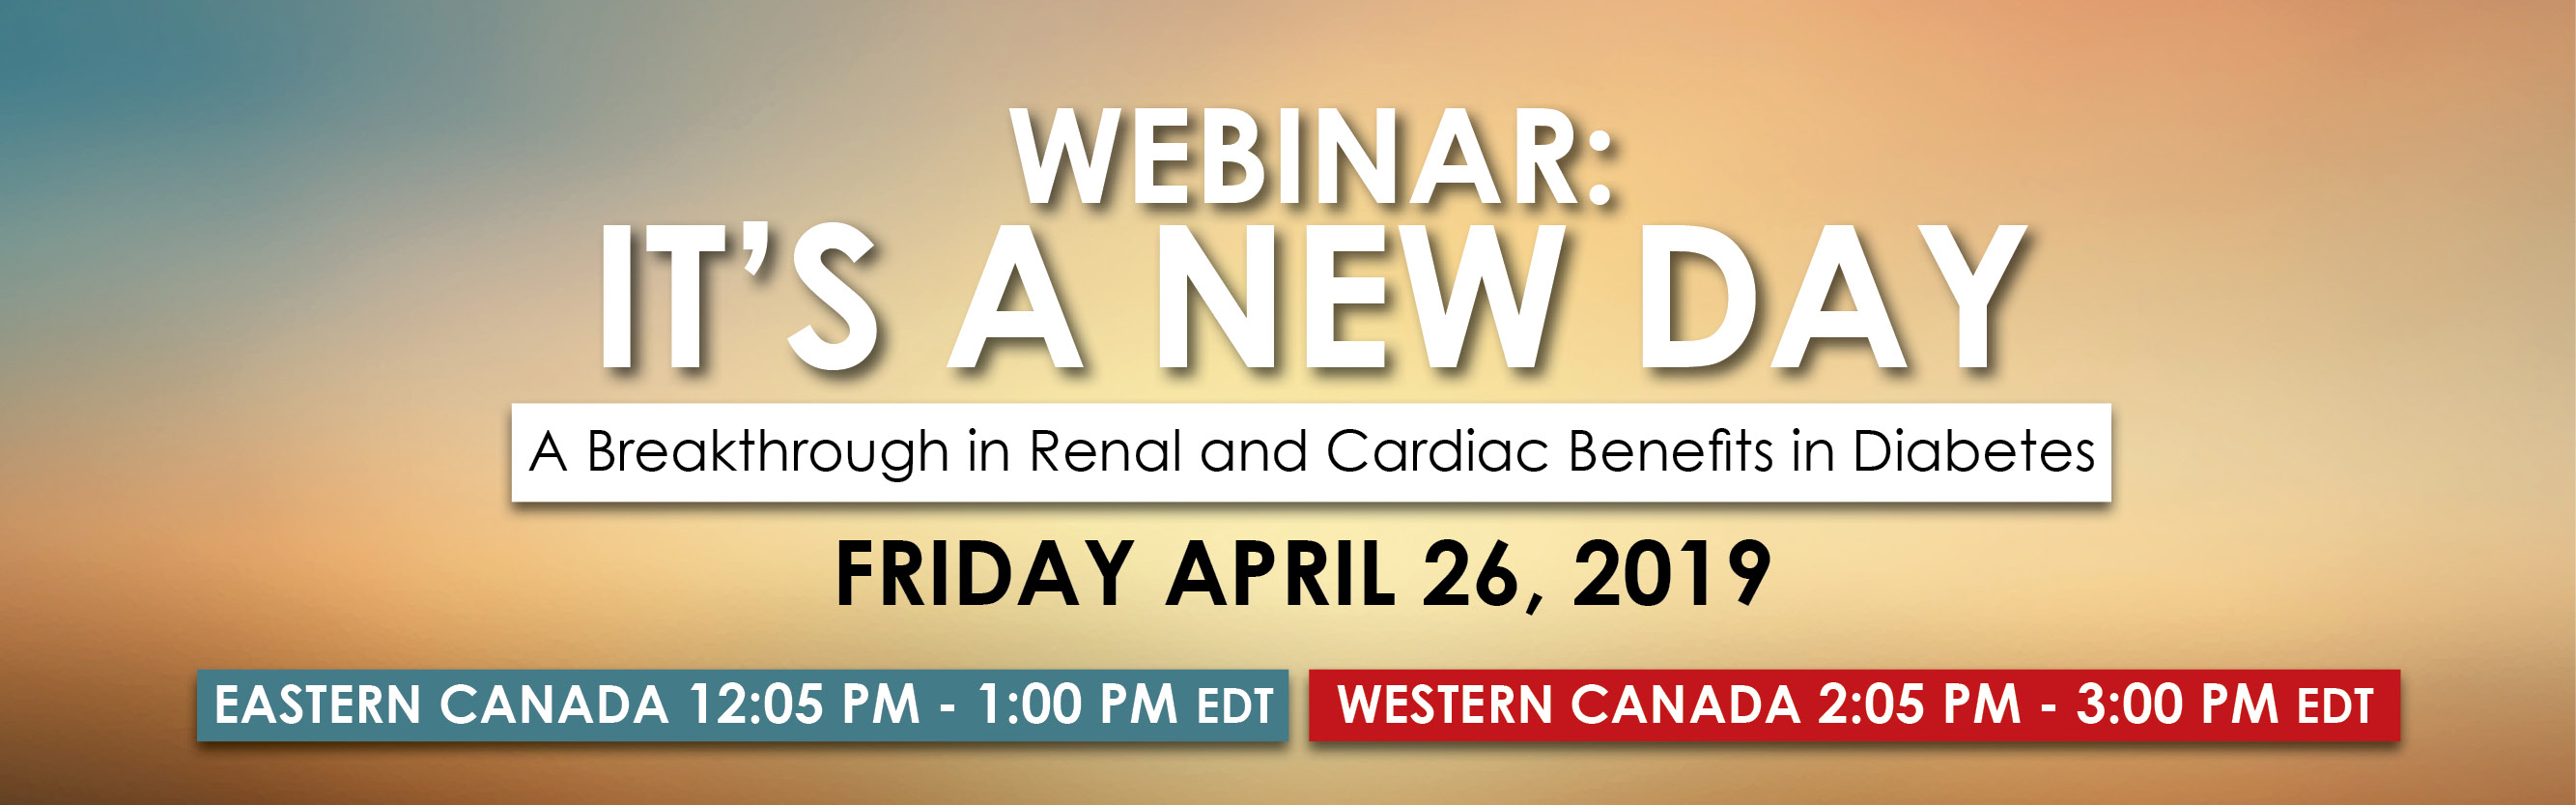 Webinar: It's A New Day - A Breakthrough in Renal and Cardiac Benefits in Diabetes